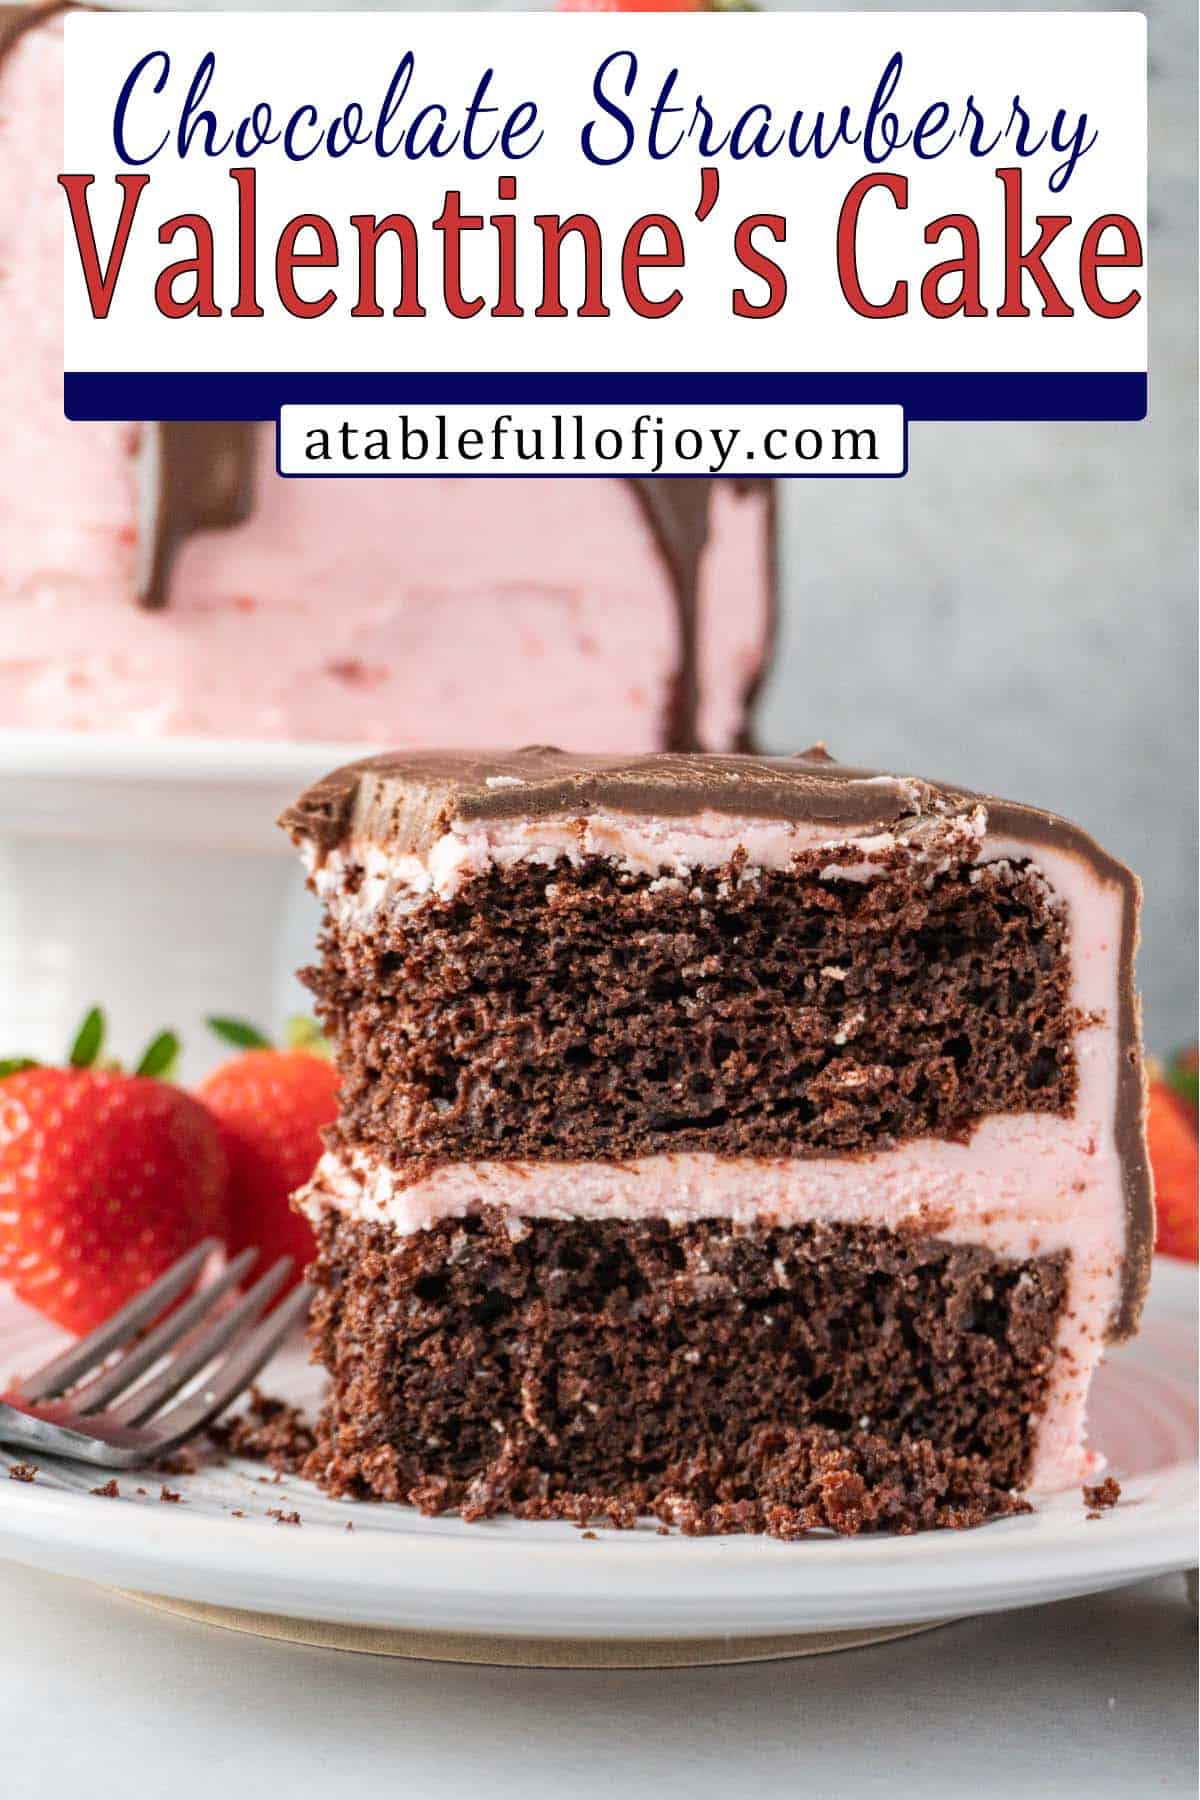 Valentine's Day Cake Pinterest pin (slice of cake with cake in background)